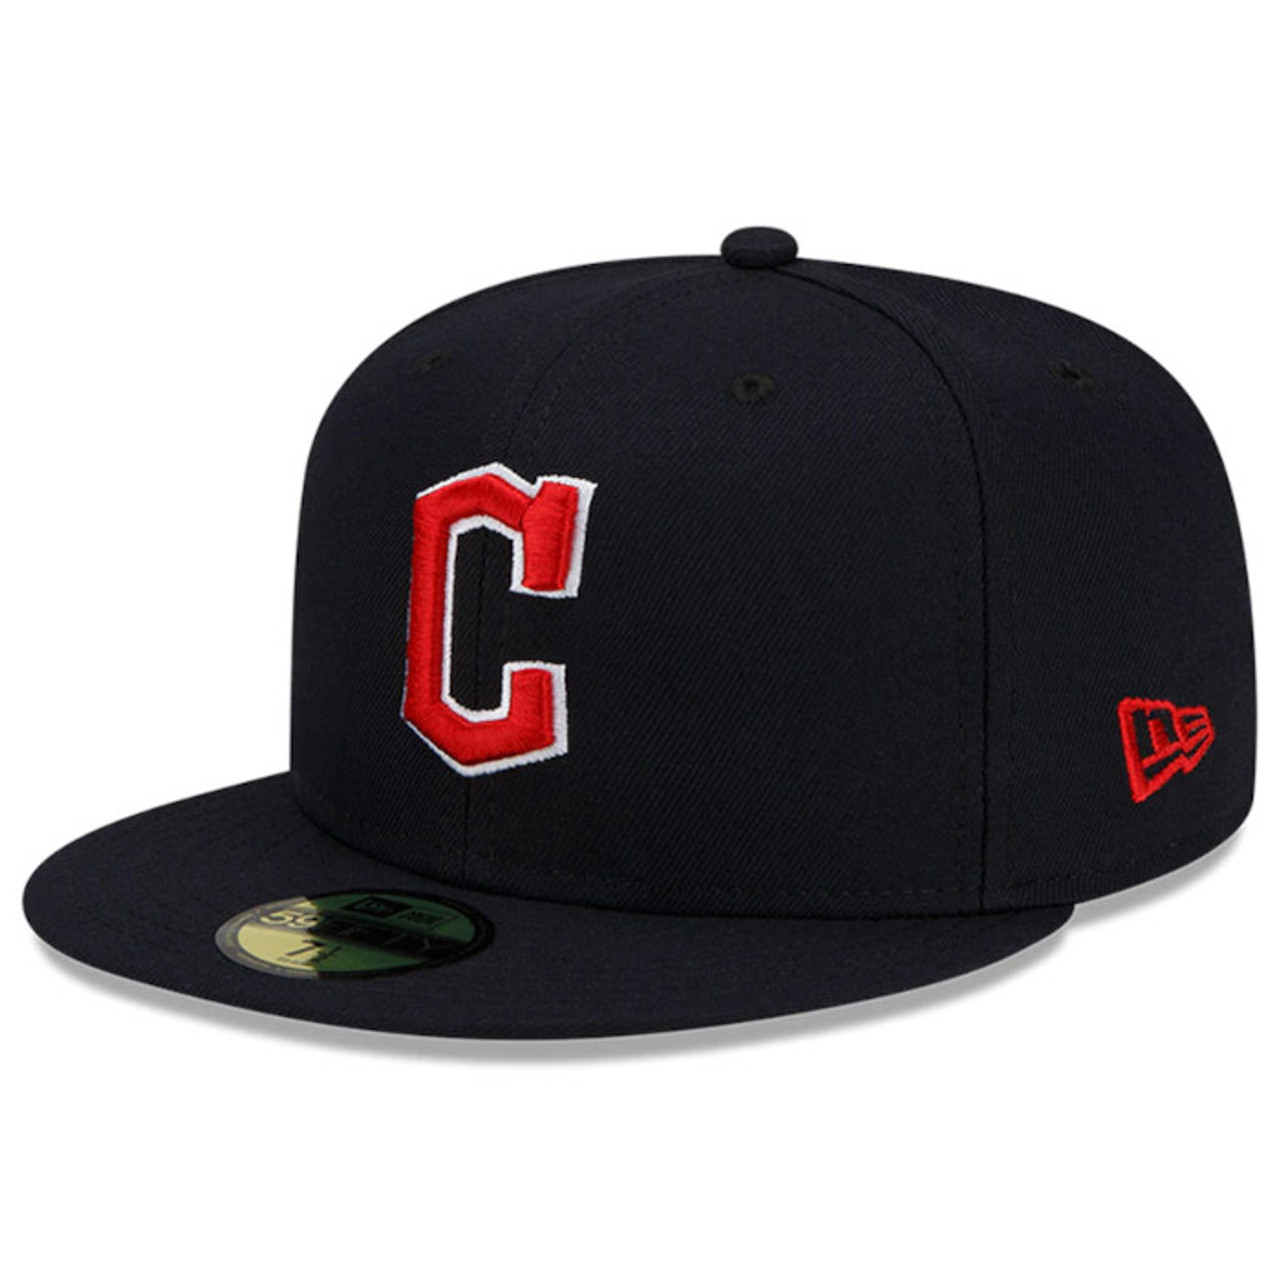 Why the Cardinals should wear navy blue caps for every road game – Dose of  Buffa